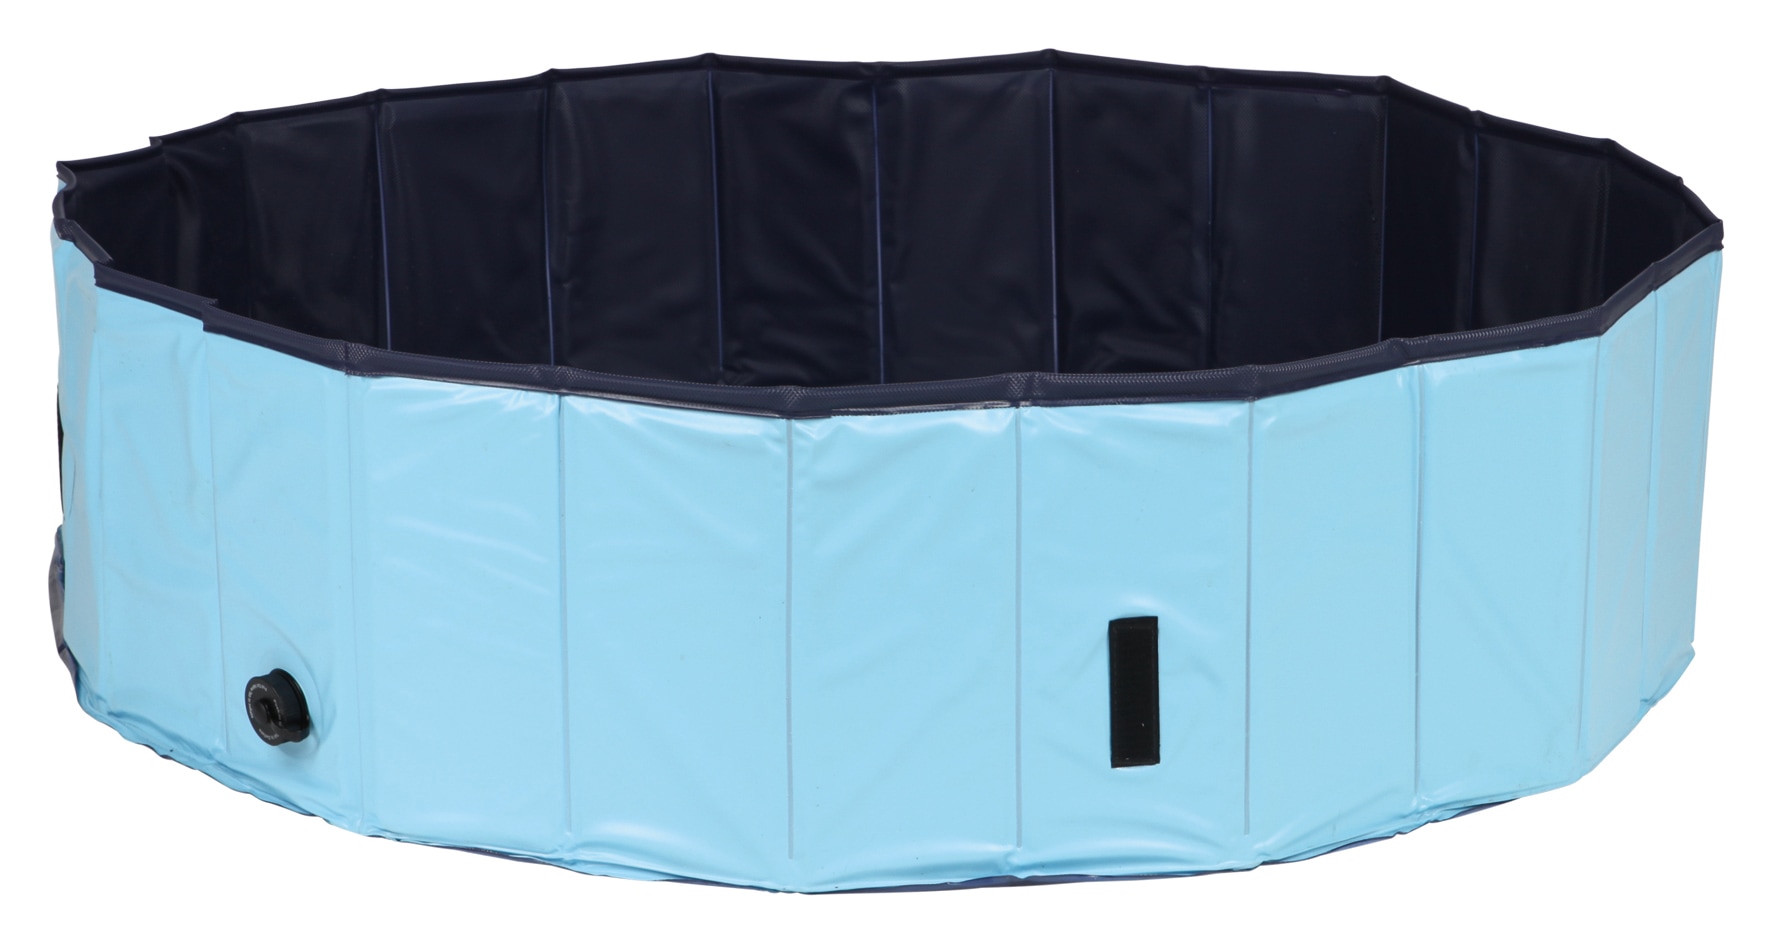 TRIXIE 63" Outdoor Splash Pool for Dogs, Foldable Playpen, Bathtub, Blue, XX-Large - image 1 of 8